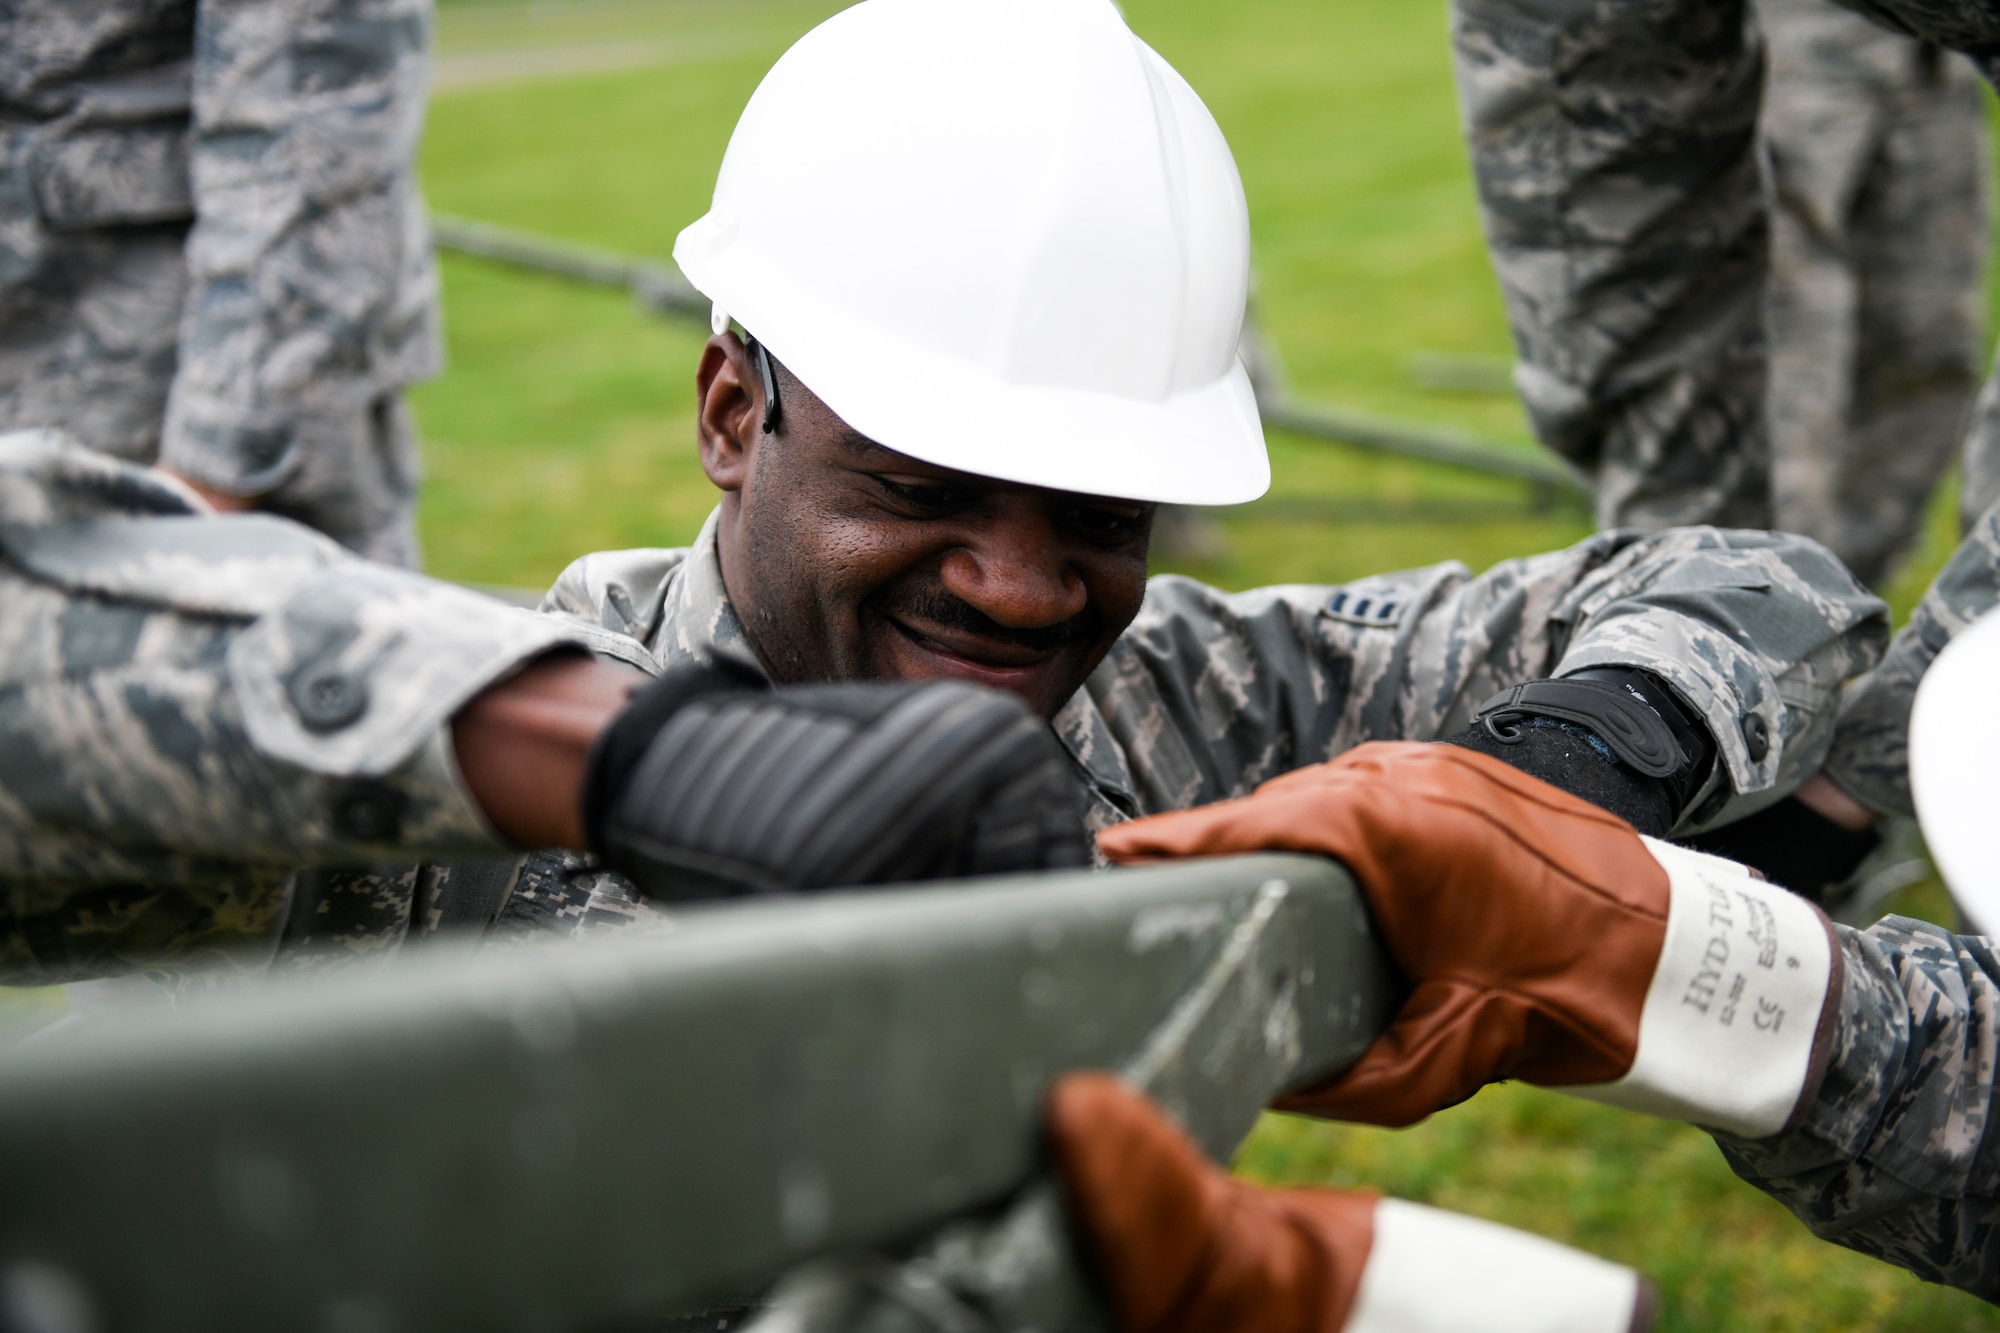 Senior Airman Lamarr Tims, 48th Civil Engineer Squadron heating, ventilation, and air conditioning technician, secures a Tent Extendable Modular Personnel tent frame with a safety pin during an inventory check and training day at Royal Air Force Feltwell, England, March 22, 2019. A TEMPER tent has an aluminum frame and is primarily covered with a vinyl coated polyester duck cloth that is fire, mildew and water resistant. (U.S. Air Force photo by Senior Airman Malcolm Mayfield)